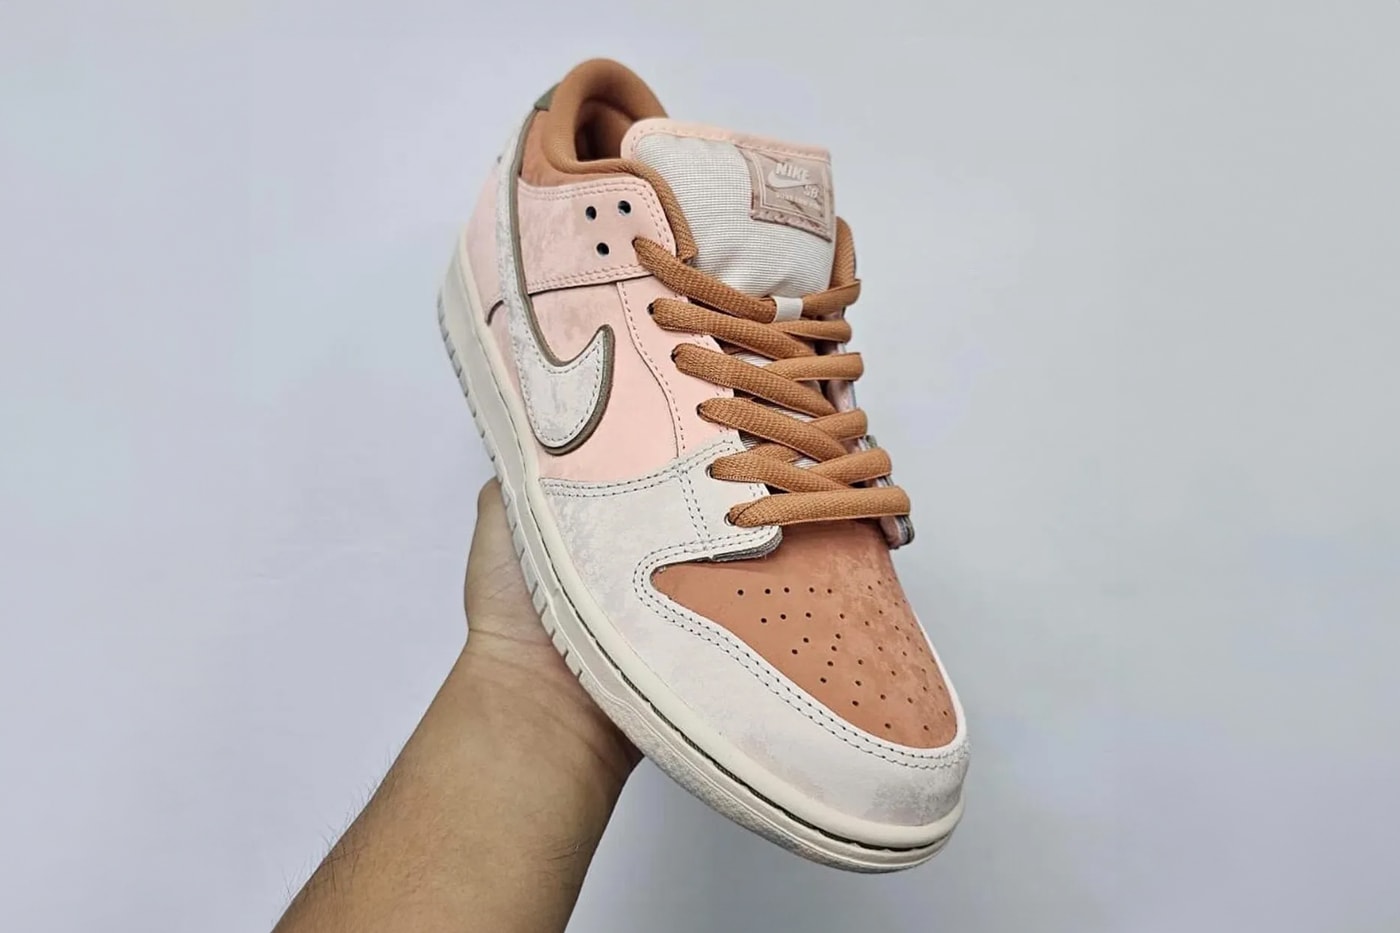 First Look at the Nike SB Dunk Low "Trocadéro Gardens" Amber Brown/Guava Ice-Crimson Tint-Hemp-Neutral Olive-Pale Ivory FV5926-200 release info paris olympics